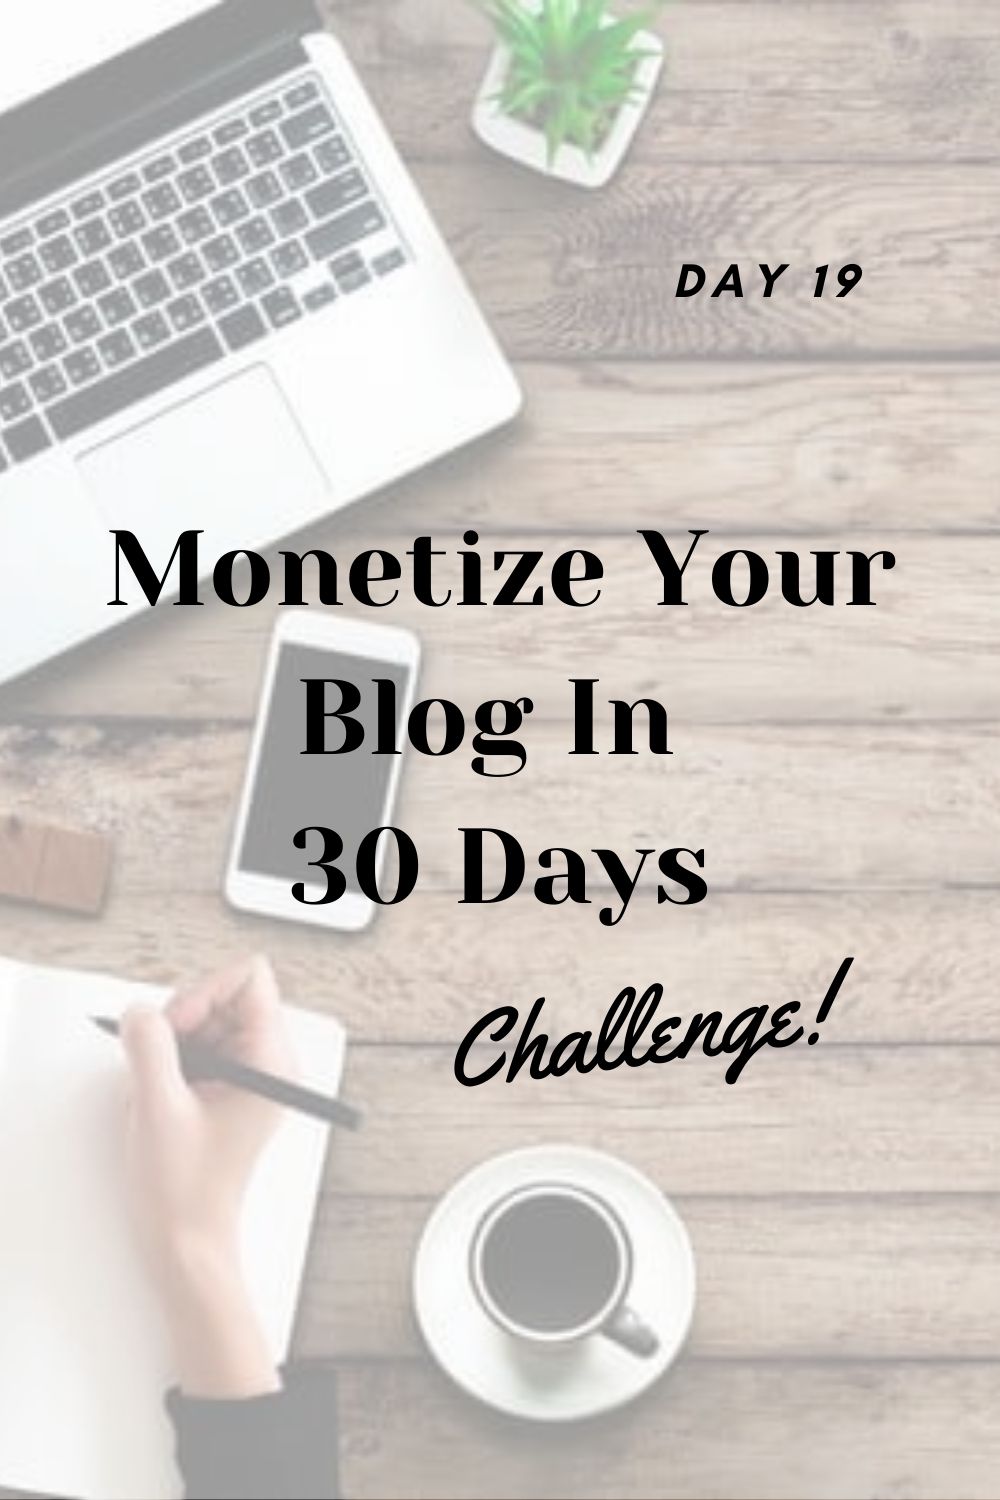 Why Using a Multi-Pronged Approach When It Comes to Monetizing Your Blog is a Good Idea